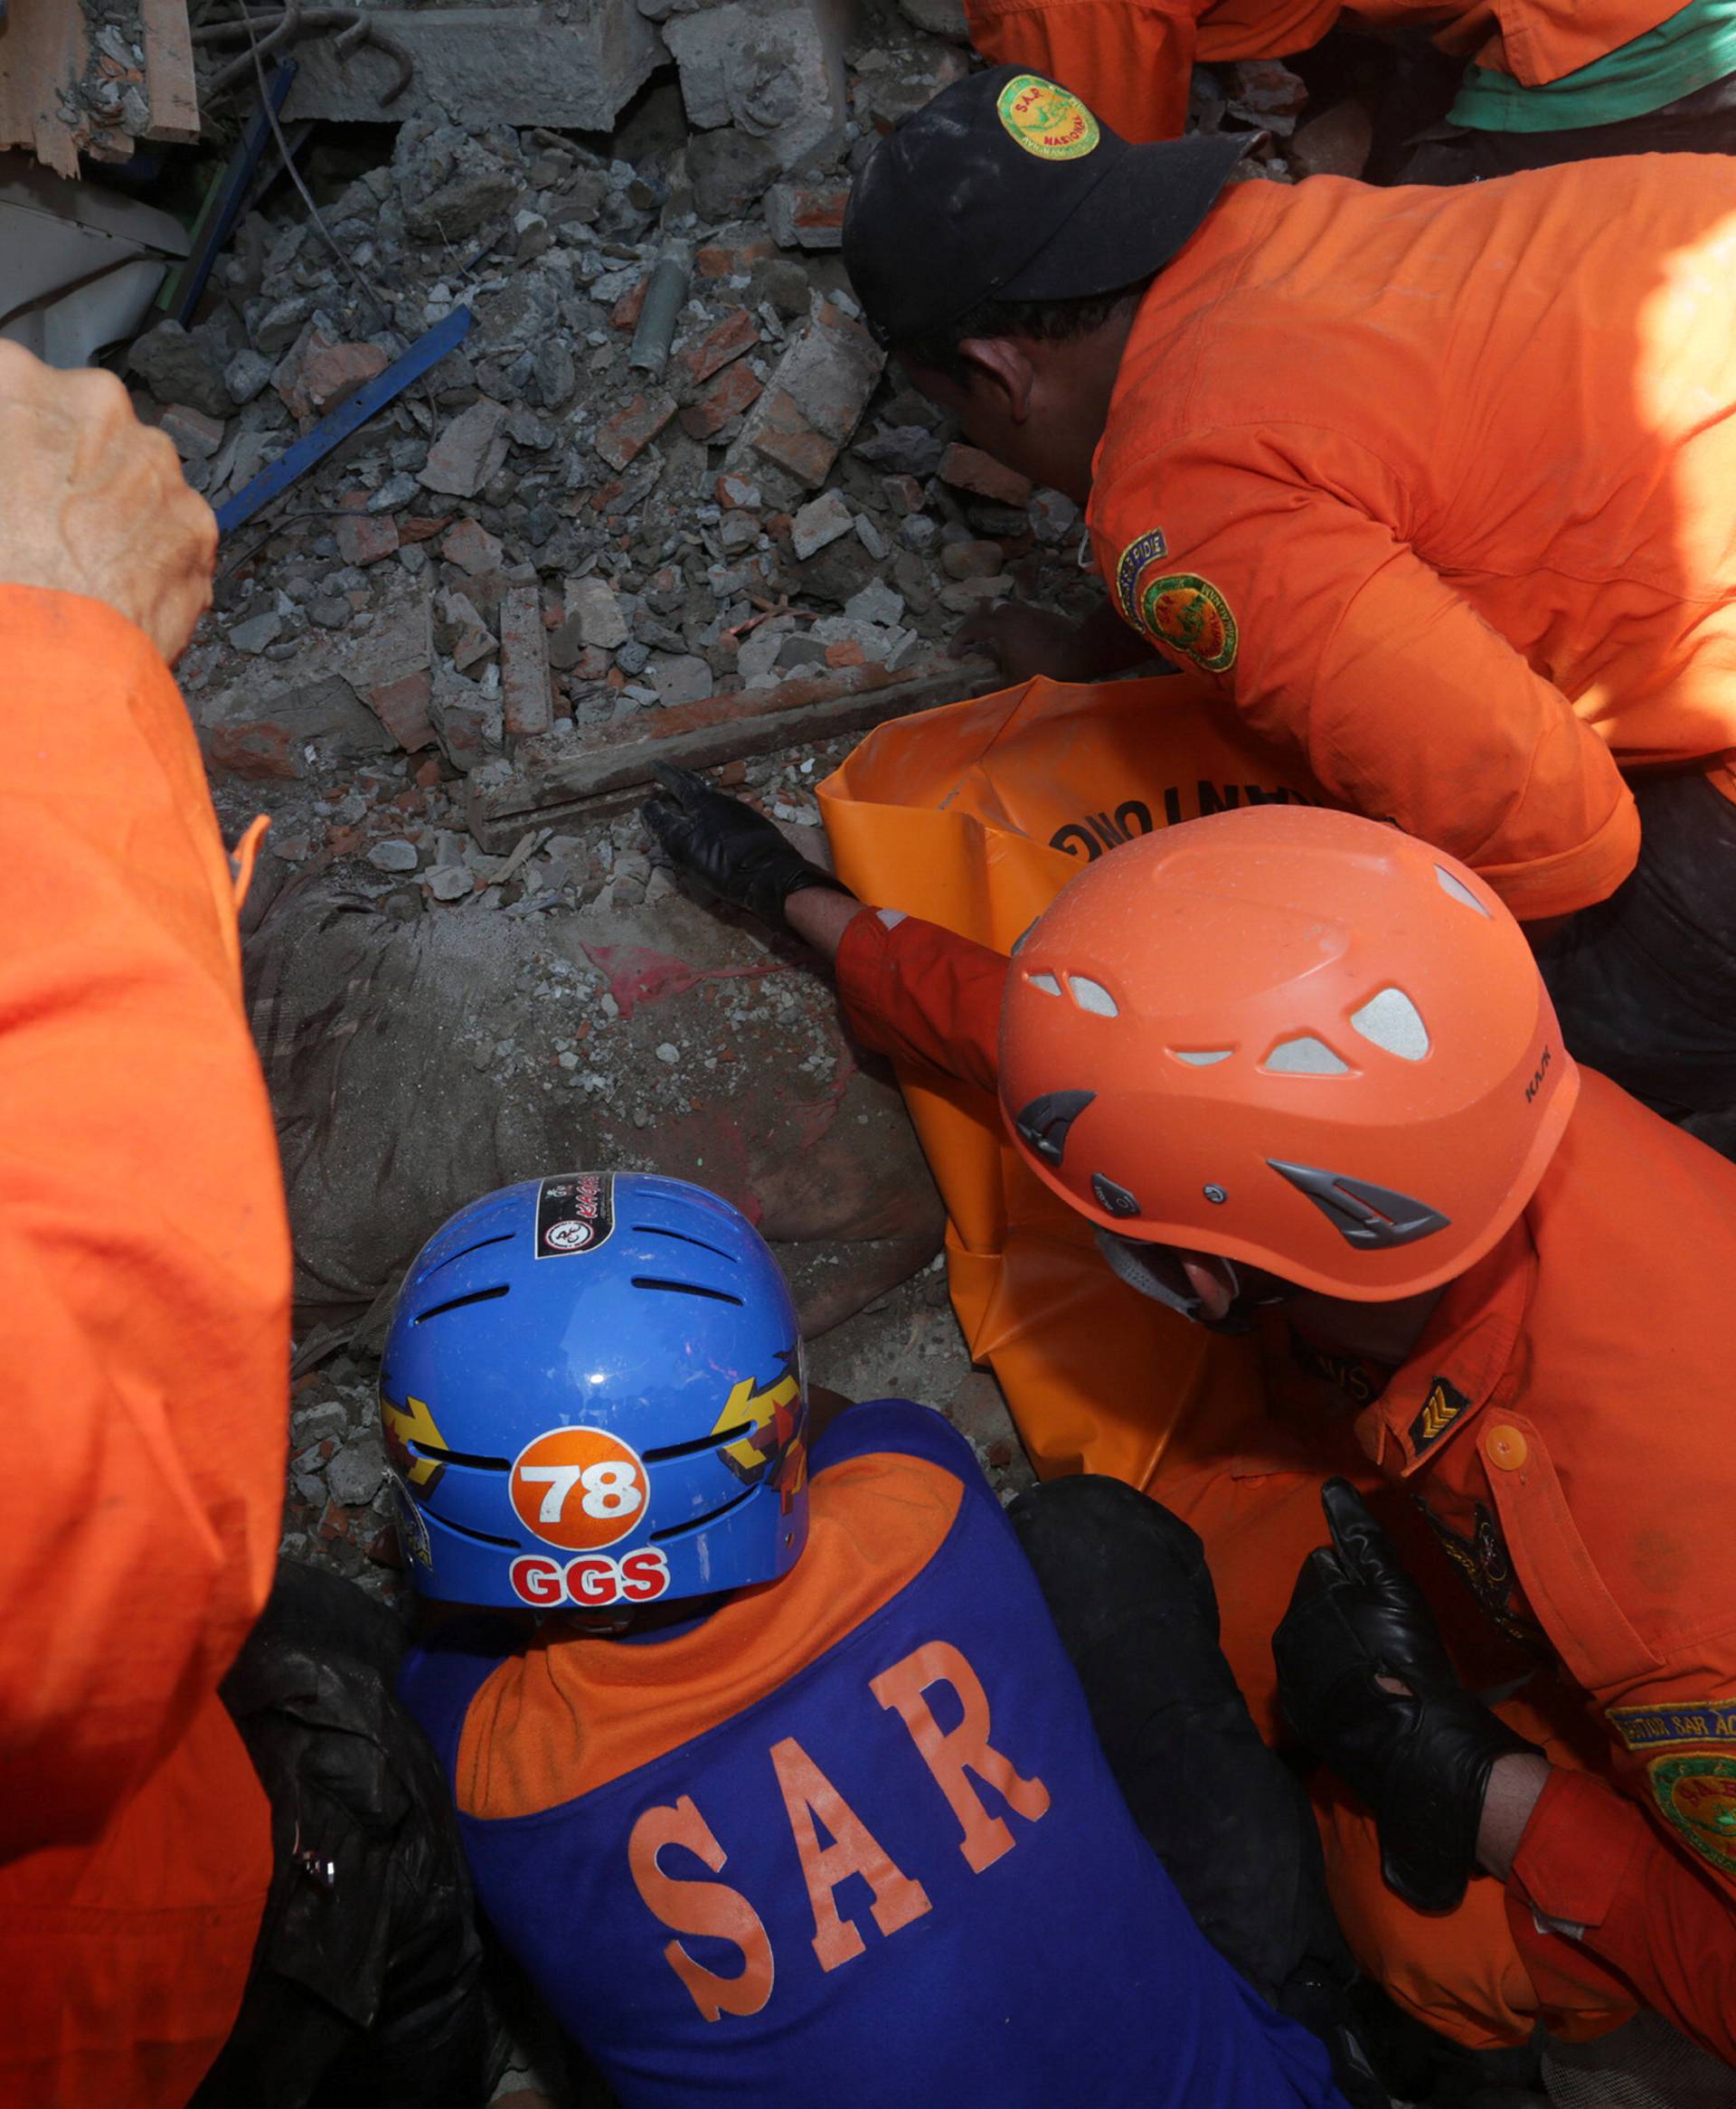 Rescue workers try to remove a victim from a collapsed building following an earthquake in Lueng Putu, Pidie Jaya in the northern province of Aceh, Indonesia